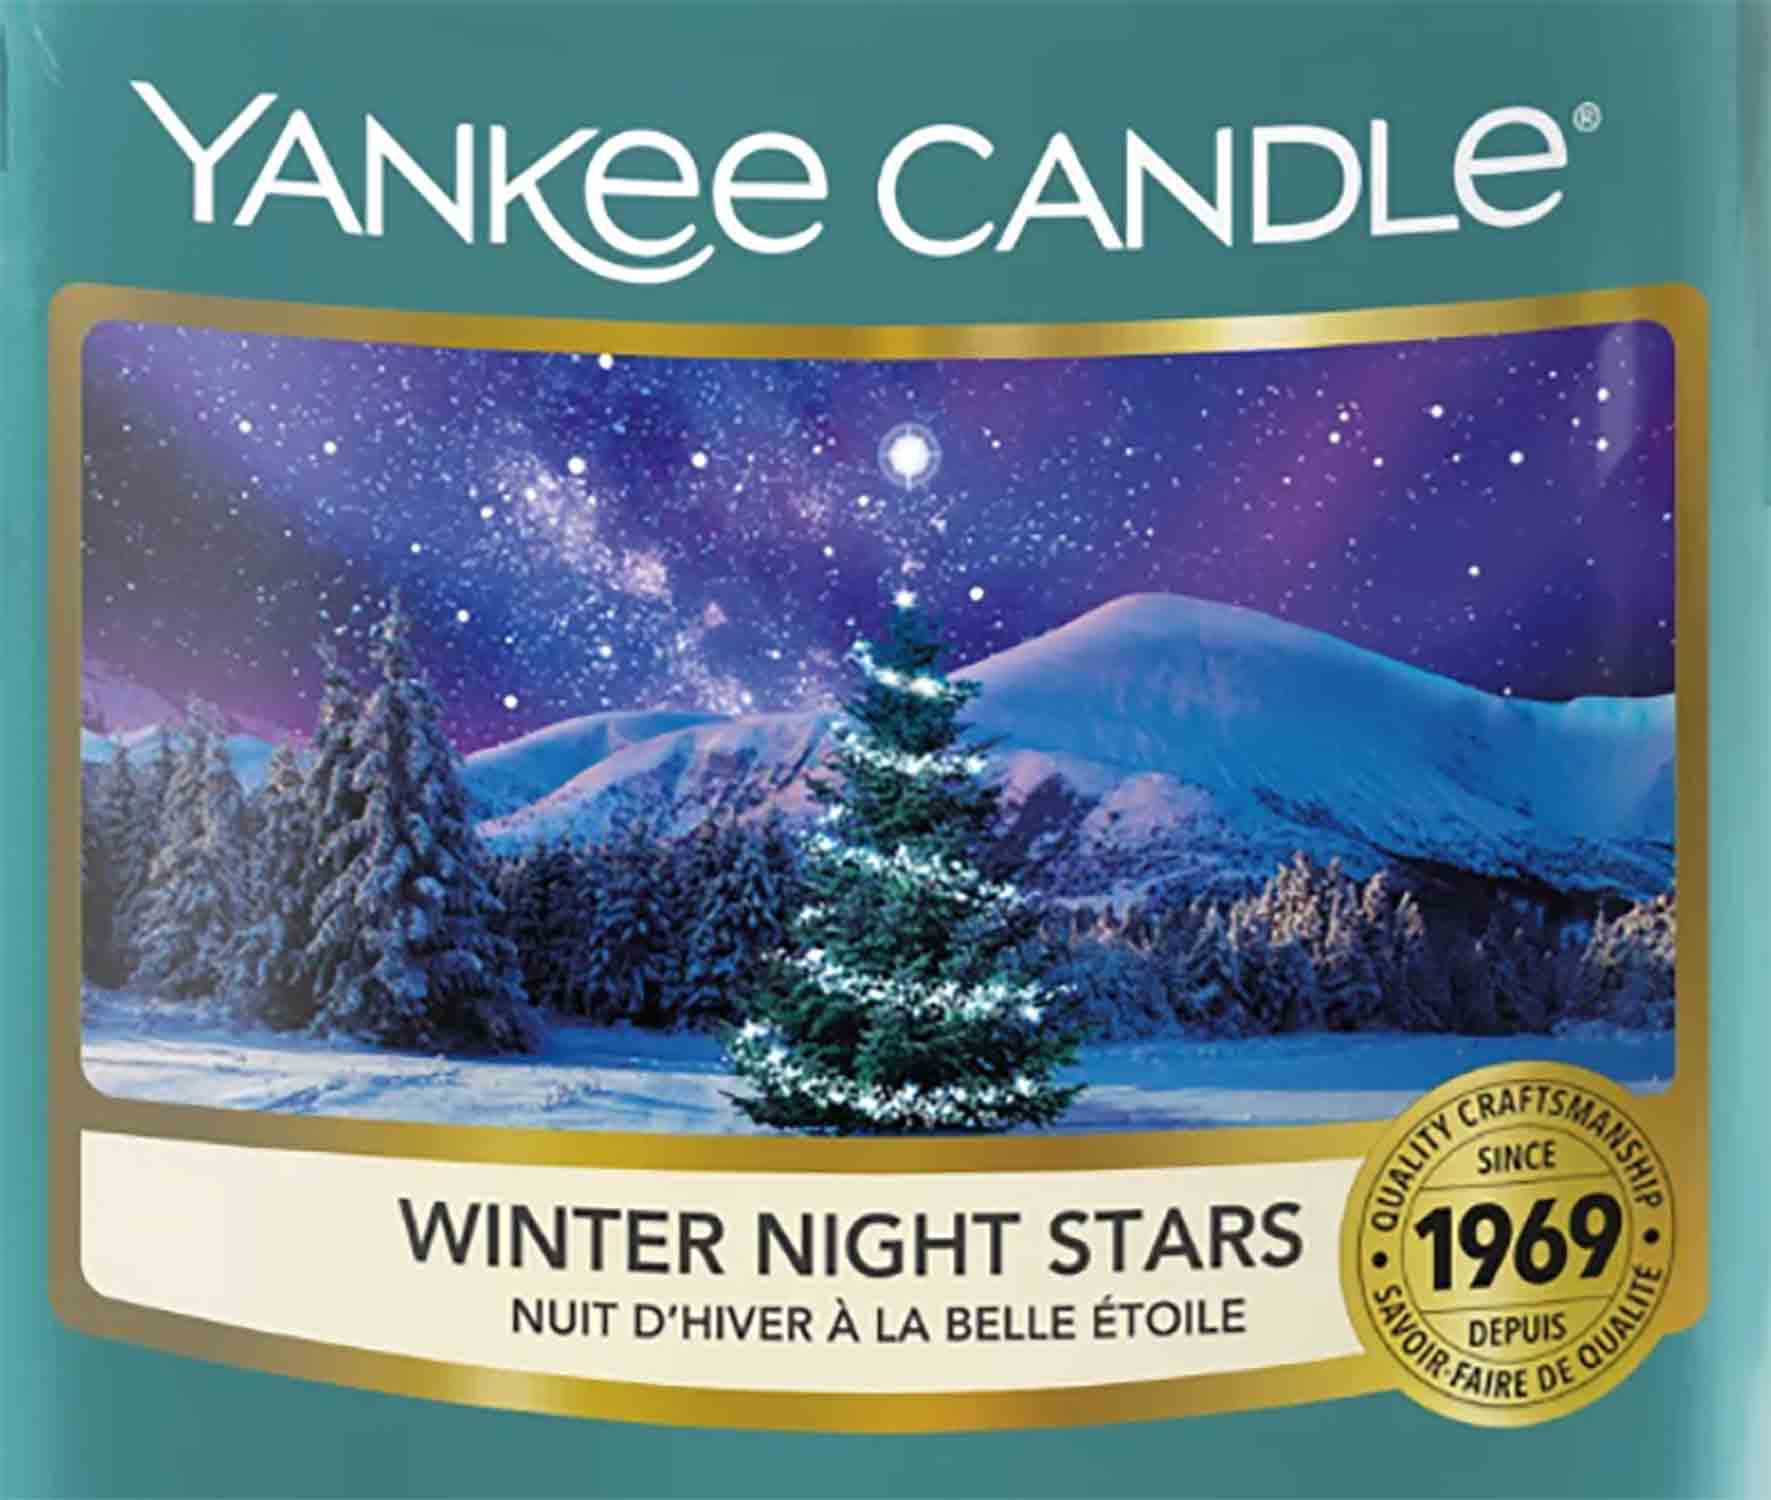 Yankee Candle Winter Night Stars 22g - Crumble vosk